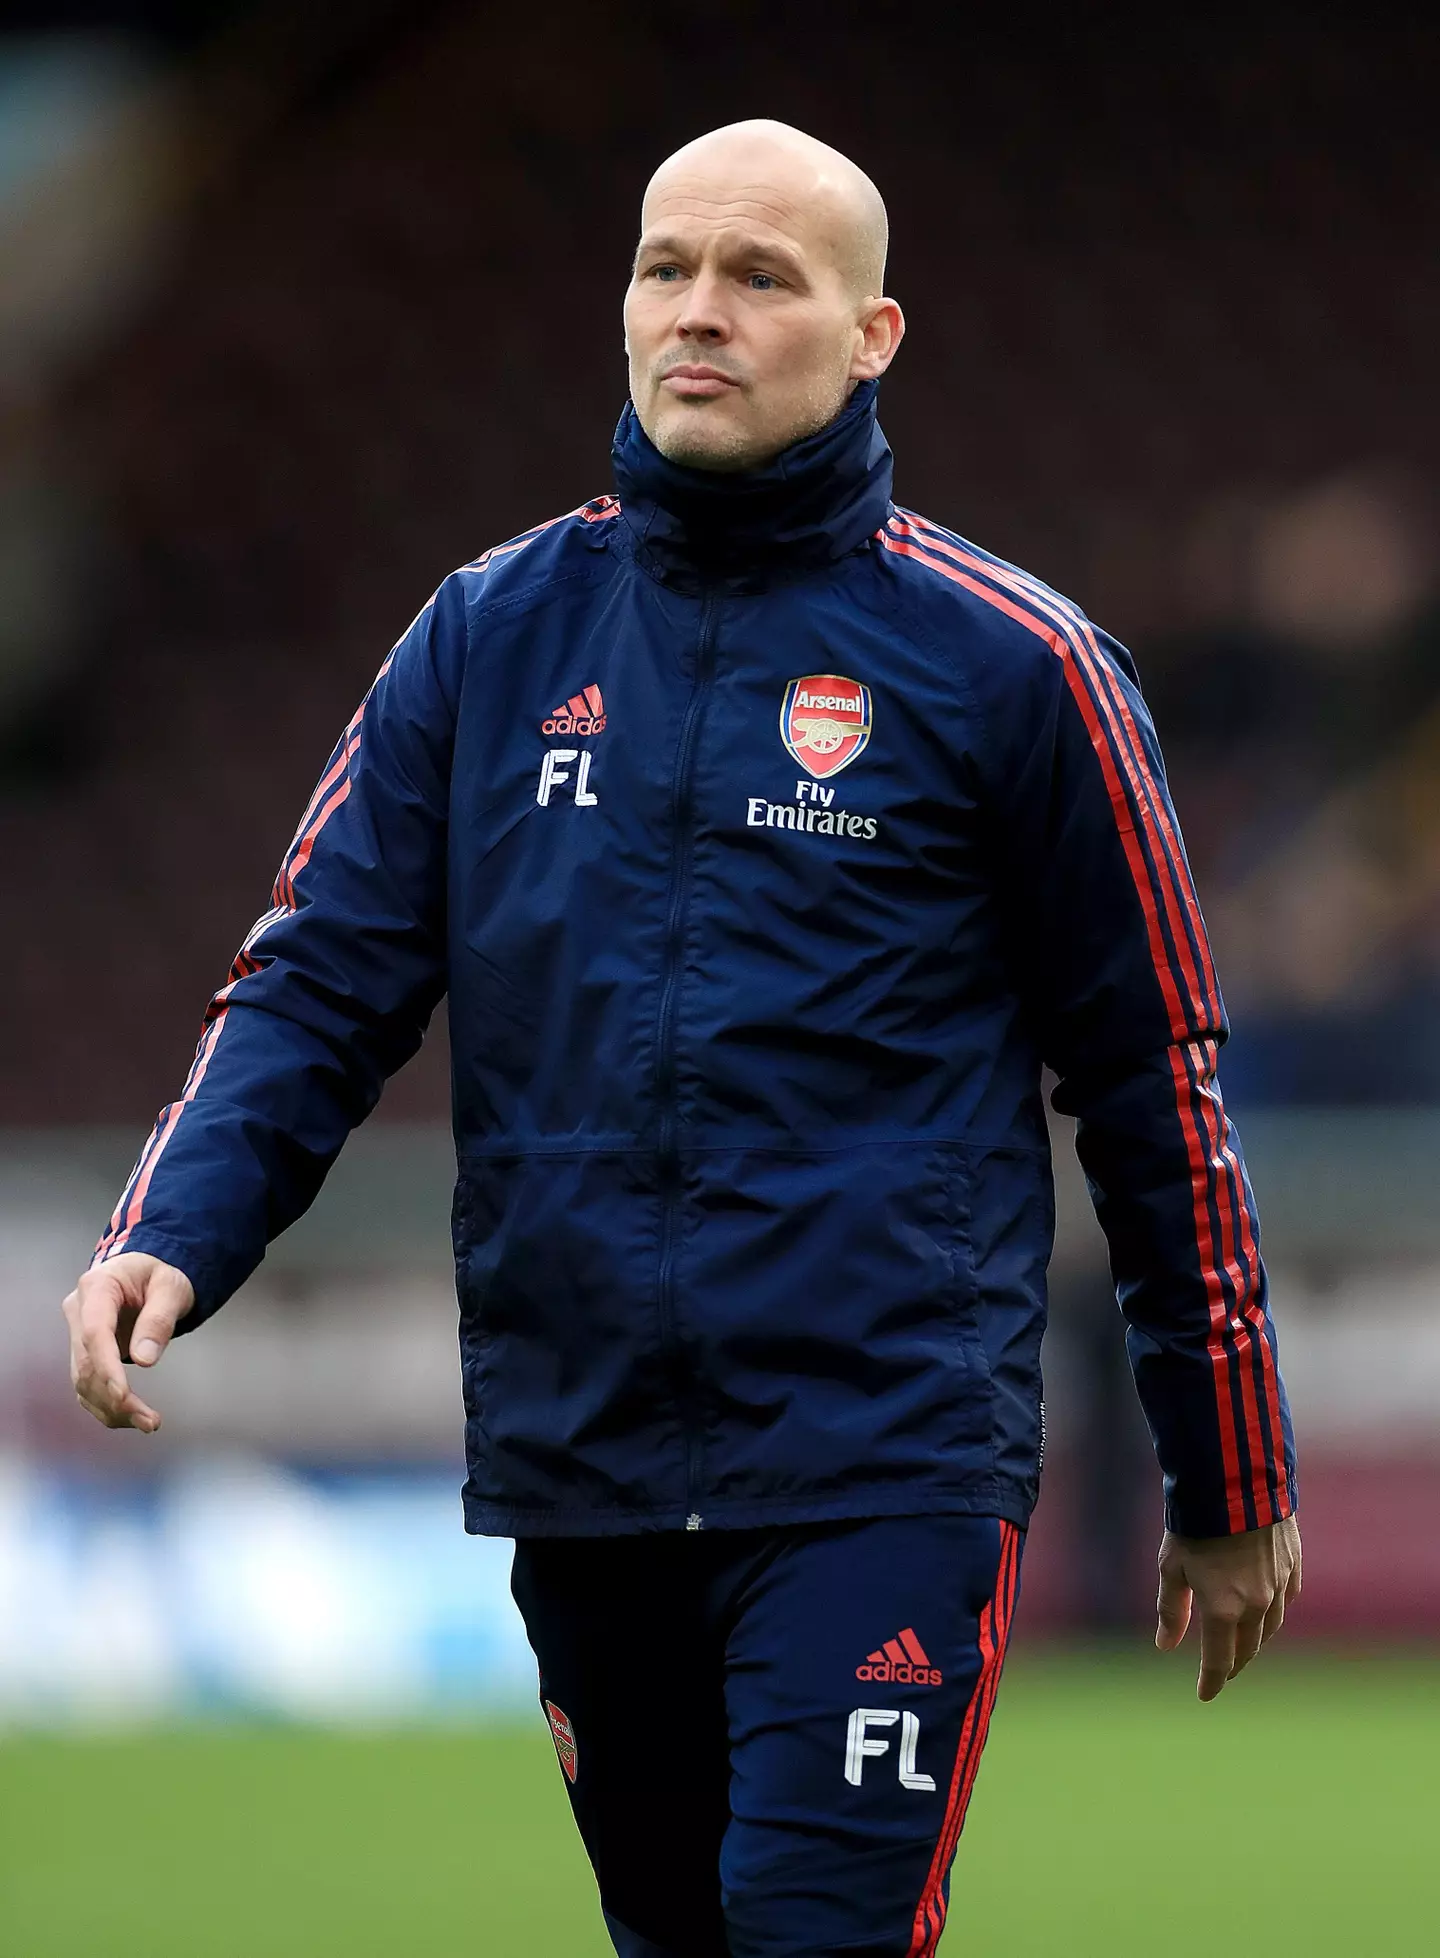 Arsenal assistant manager Freddie Ljungberg. PA Images / Alamy Stock Photo